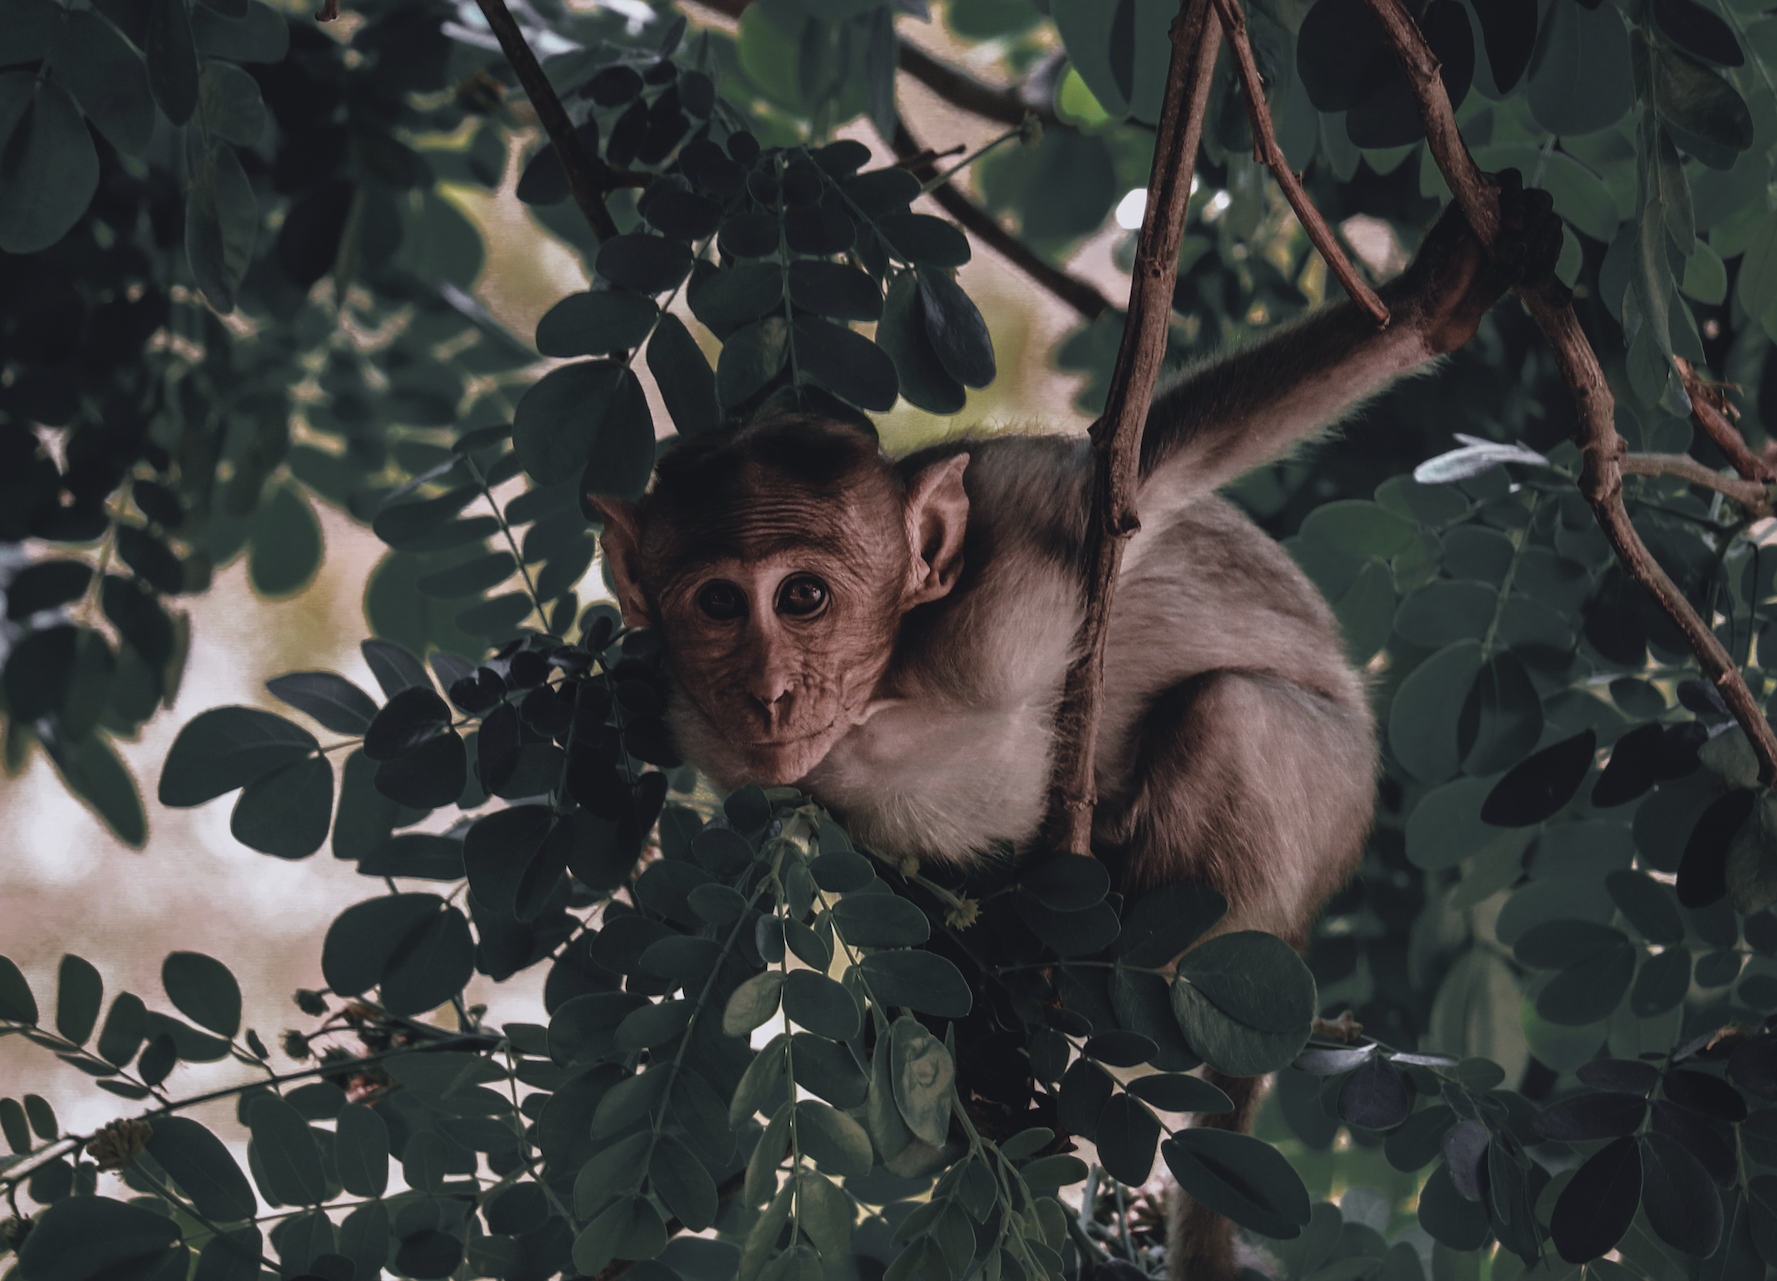 A monkey hanging in a tree looks into the camera